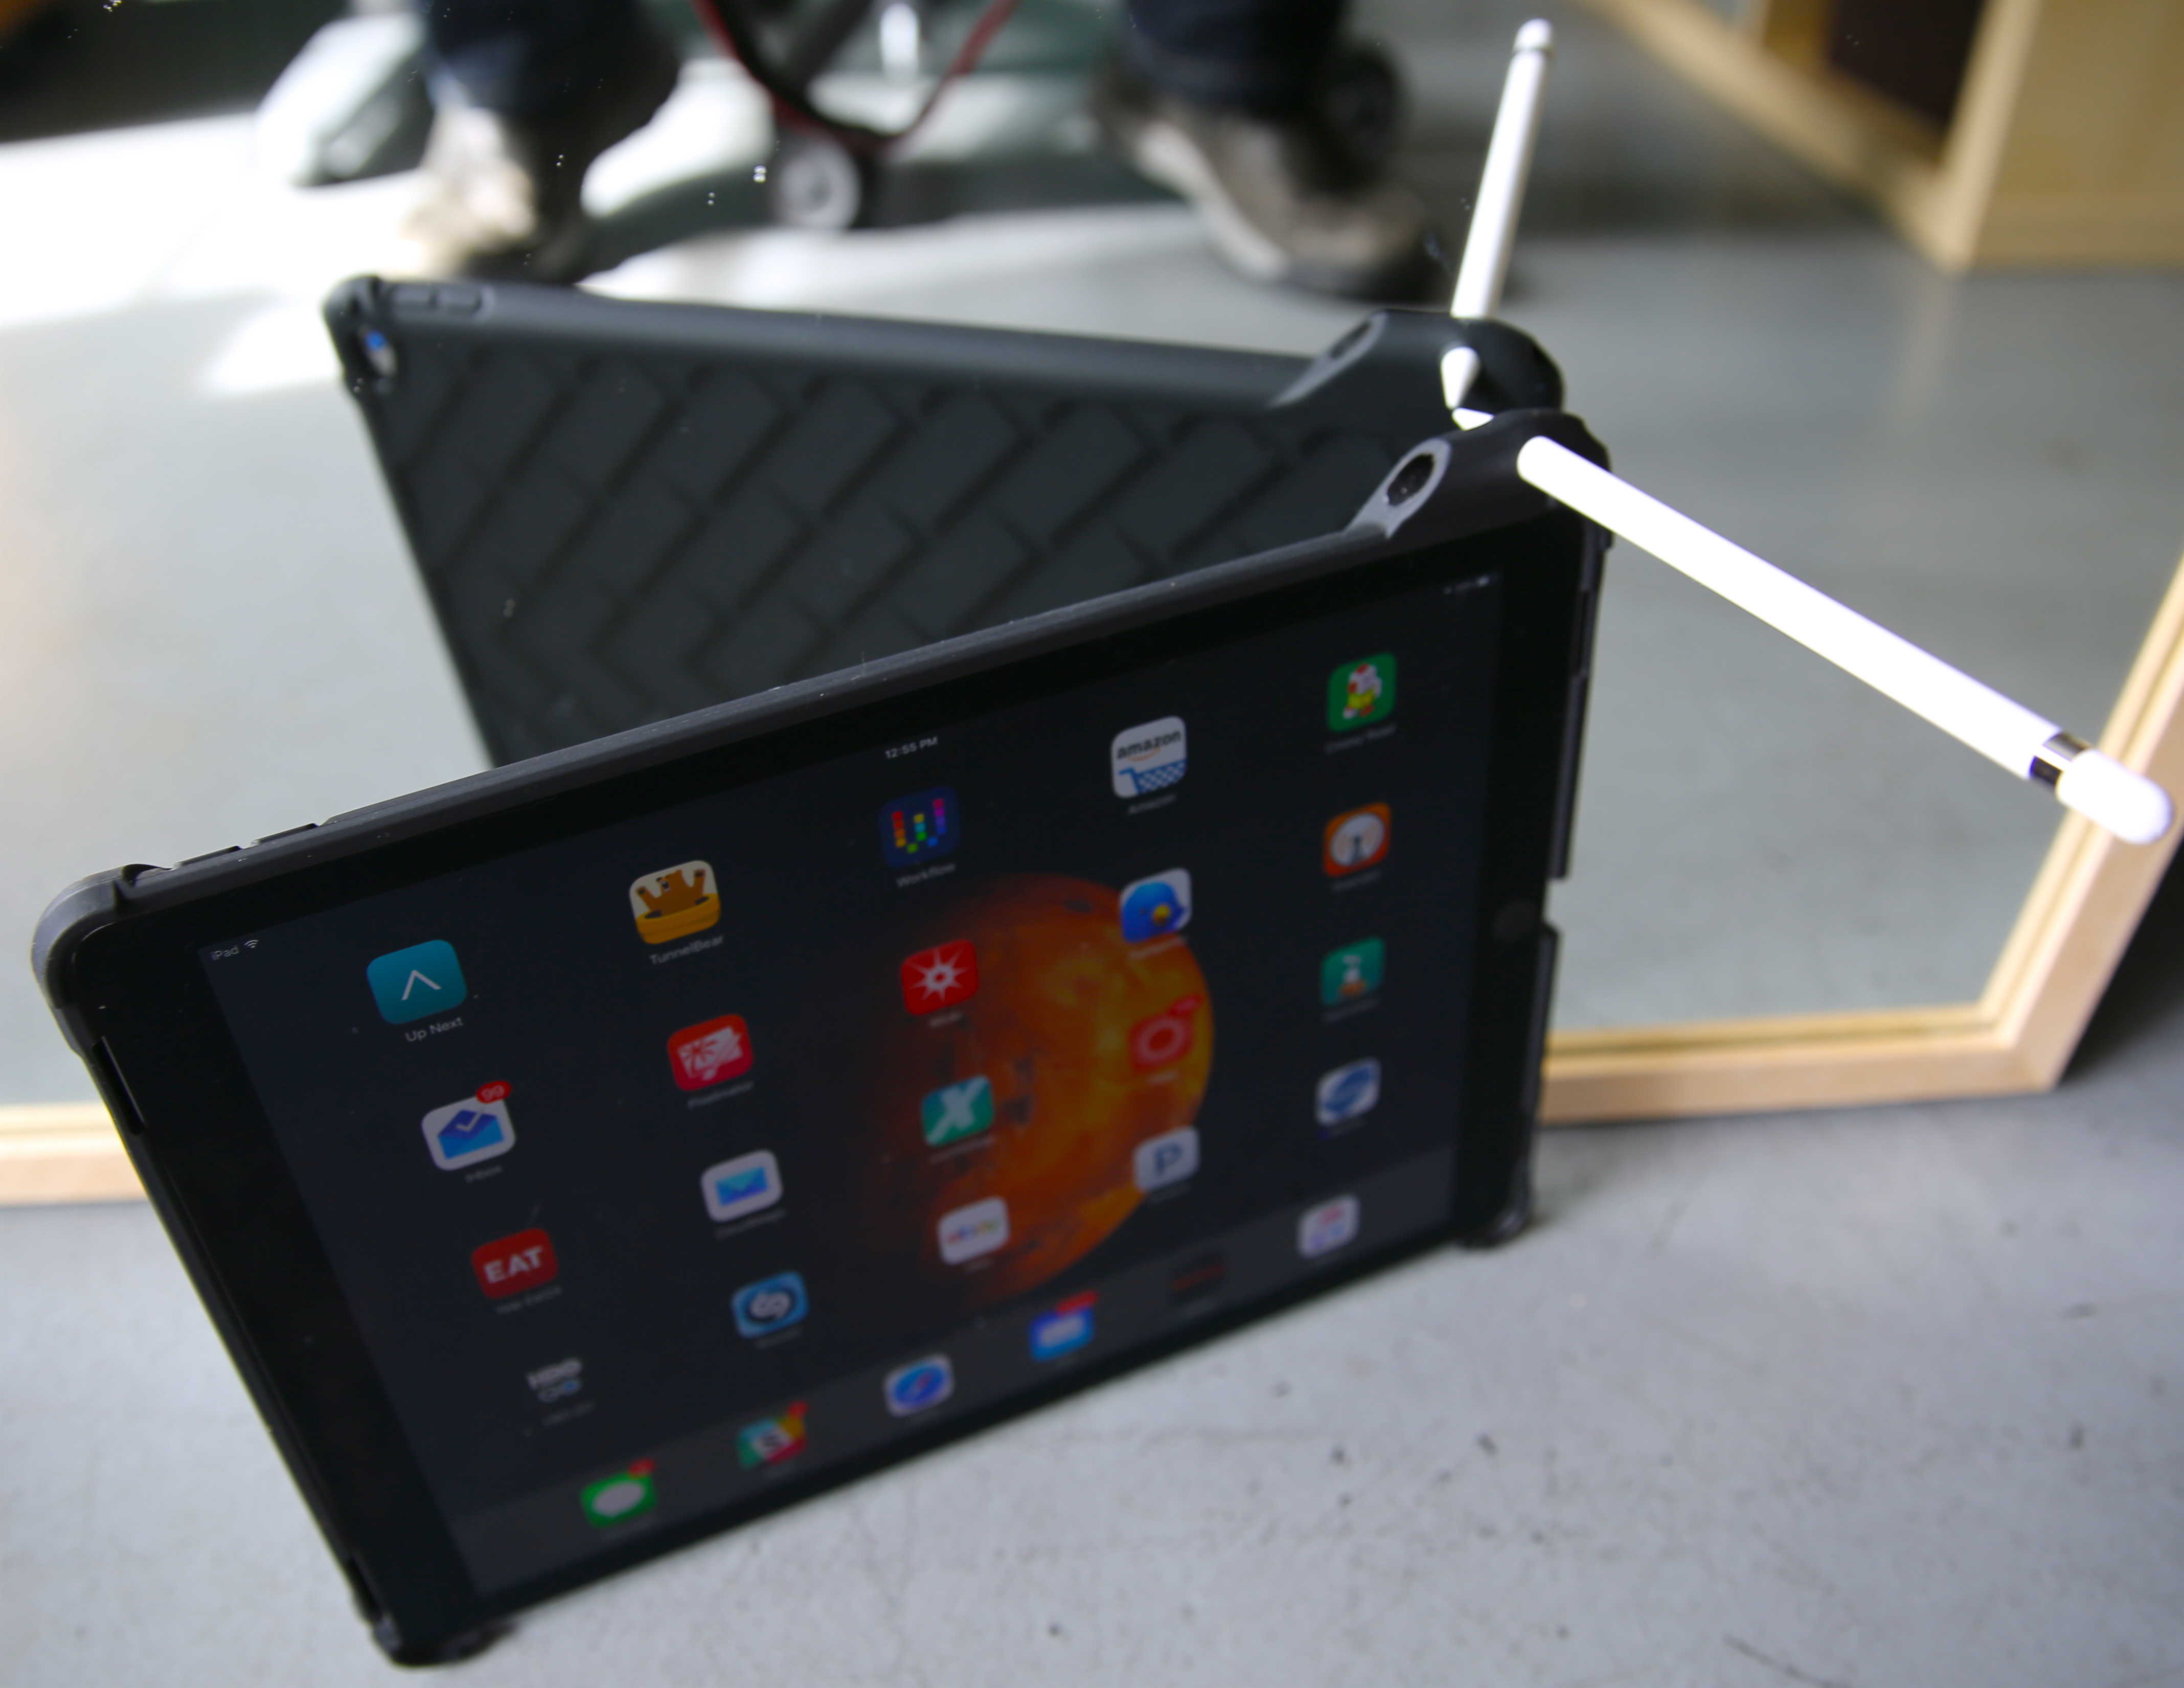 As a working iPad, the Pro needs protection like Gumdrop's DropTech Case for iPad Pro.